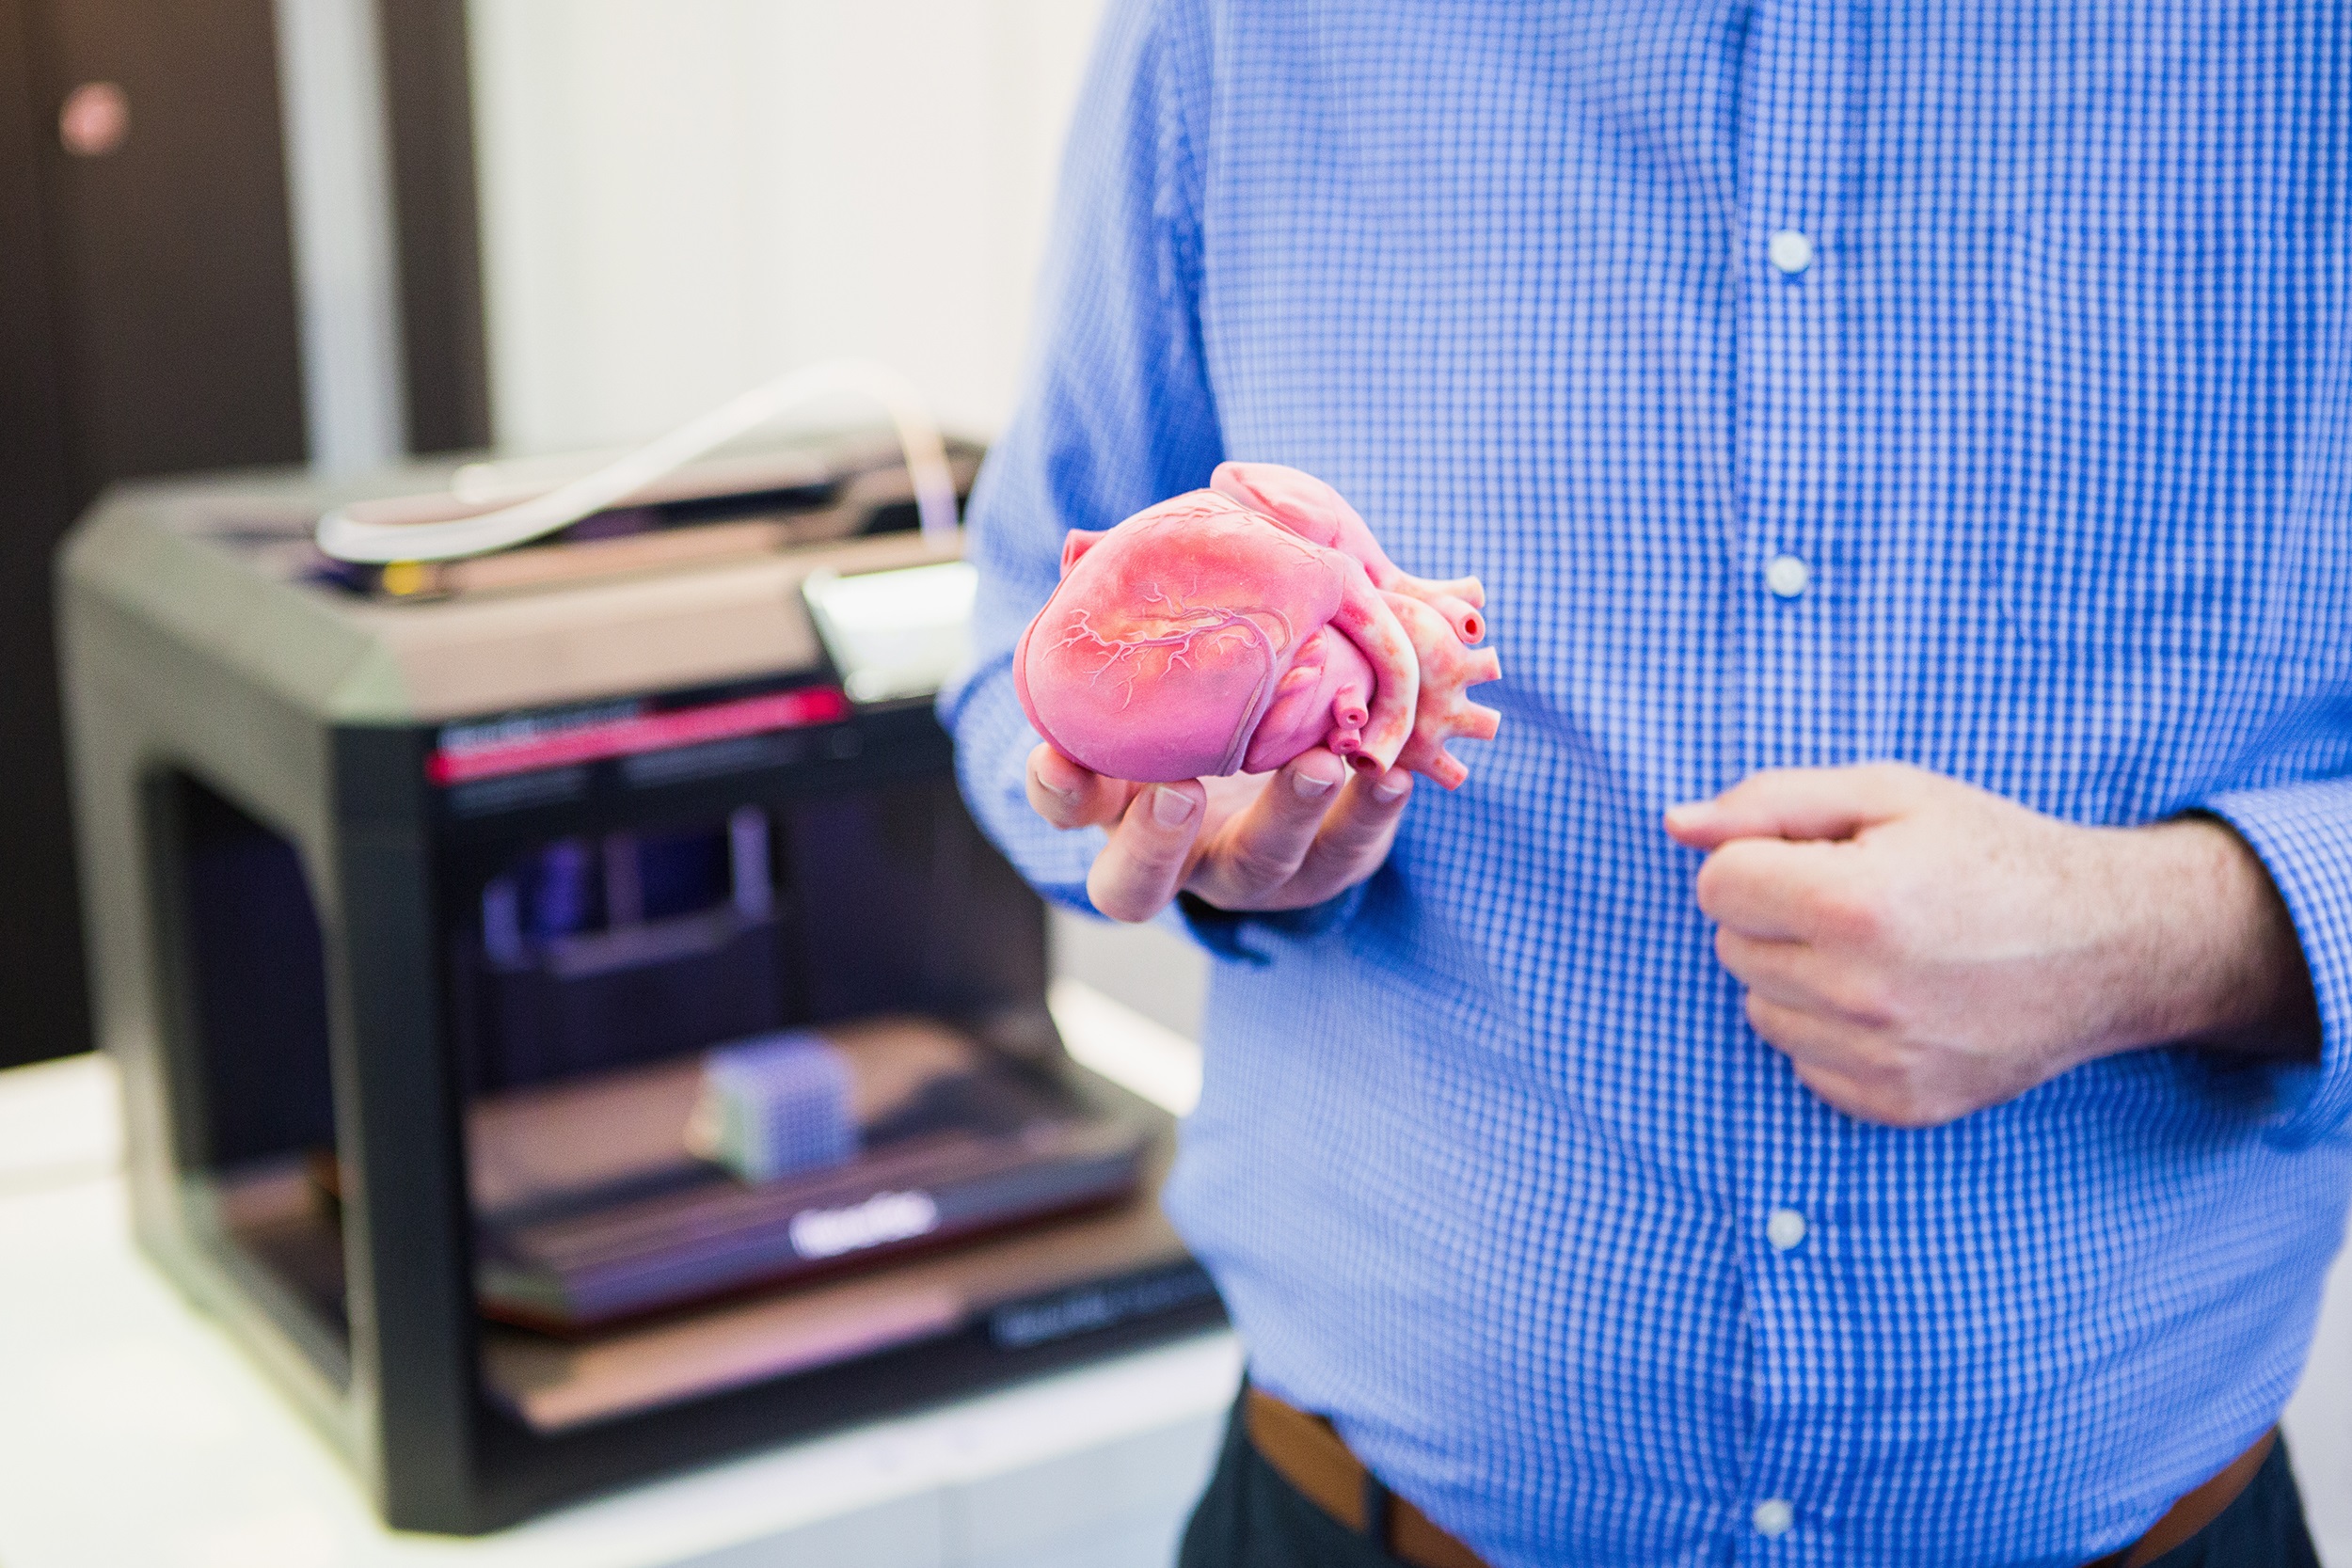 3D printing medical devices, organ models, and prosthetics